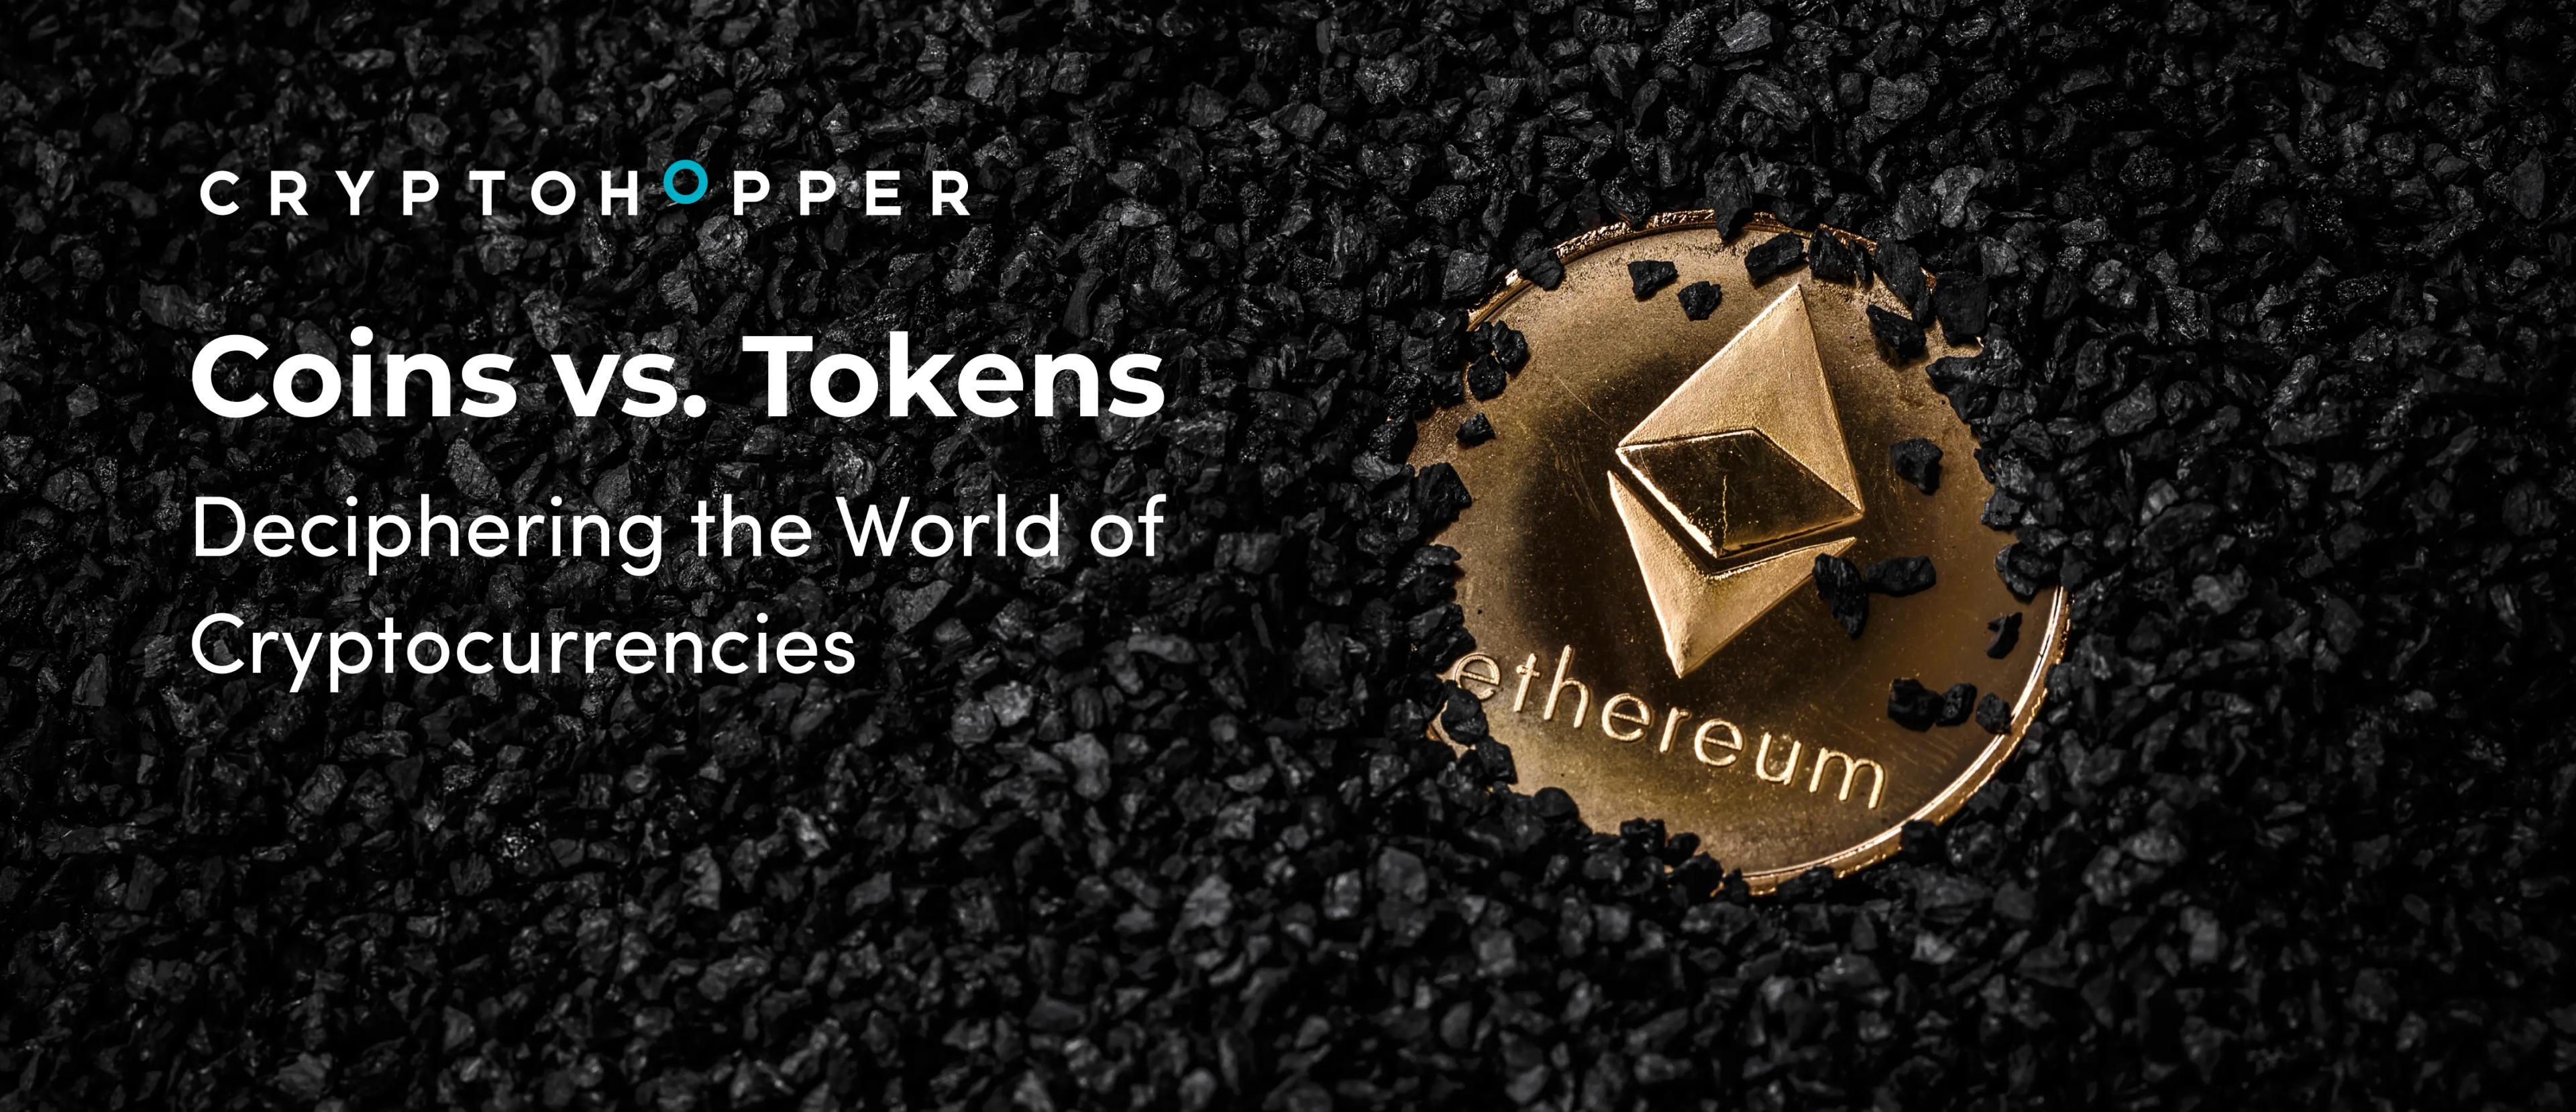 Coins vs. Tokens: Deciphering the World of Cryptocurrencies